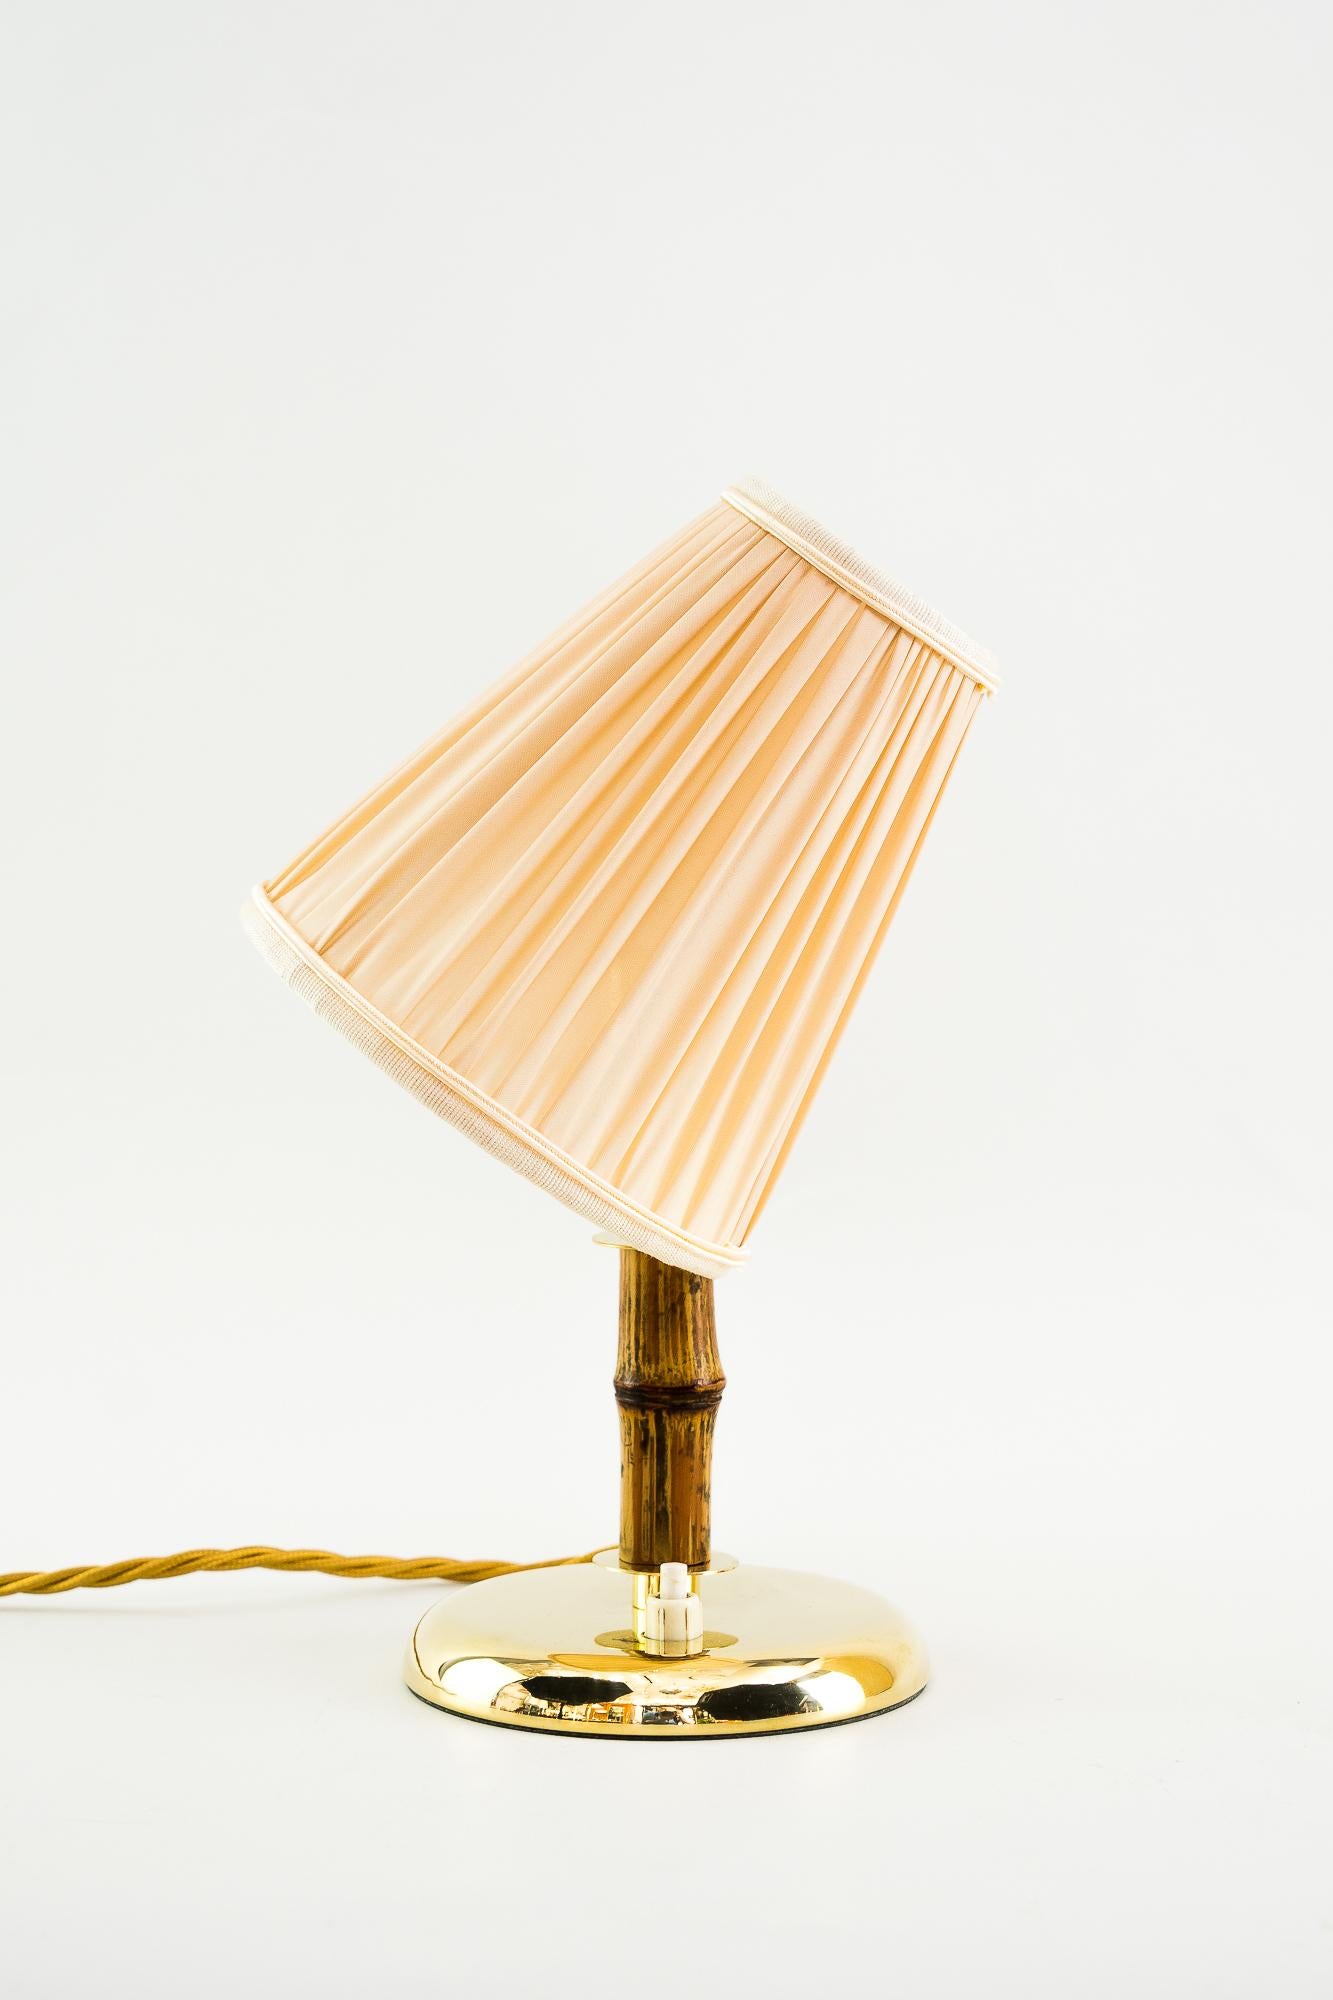 Rupert Nikoll table lamp, Vienna, 1950s
Brass polished and stove enameled
Original bamboo.